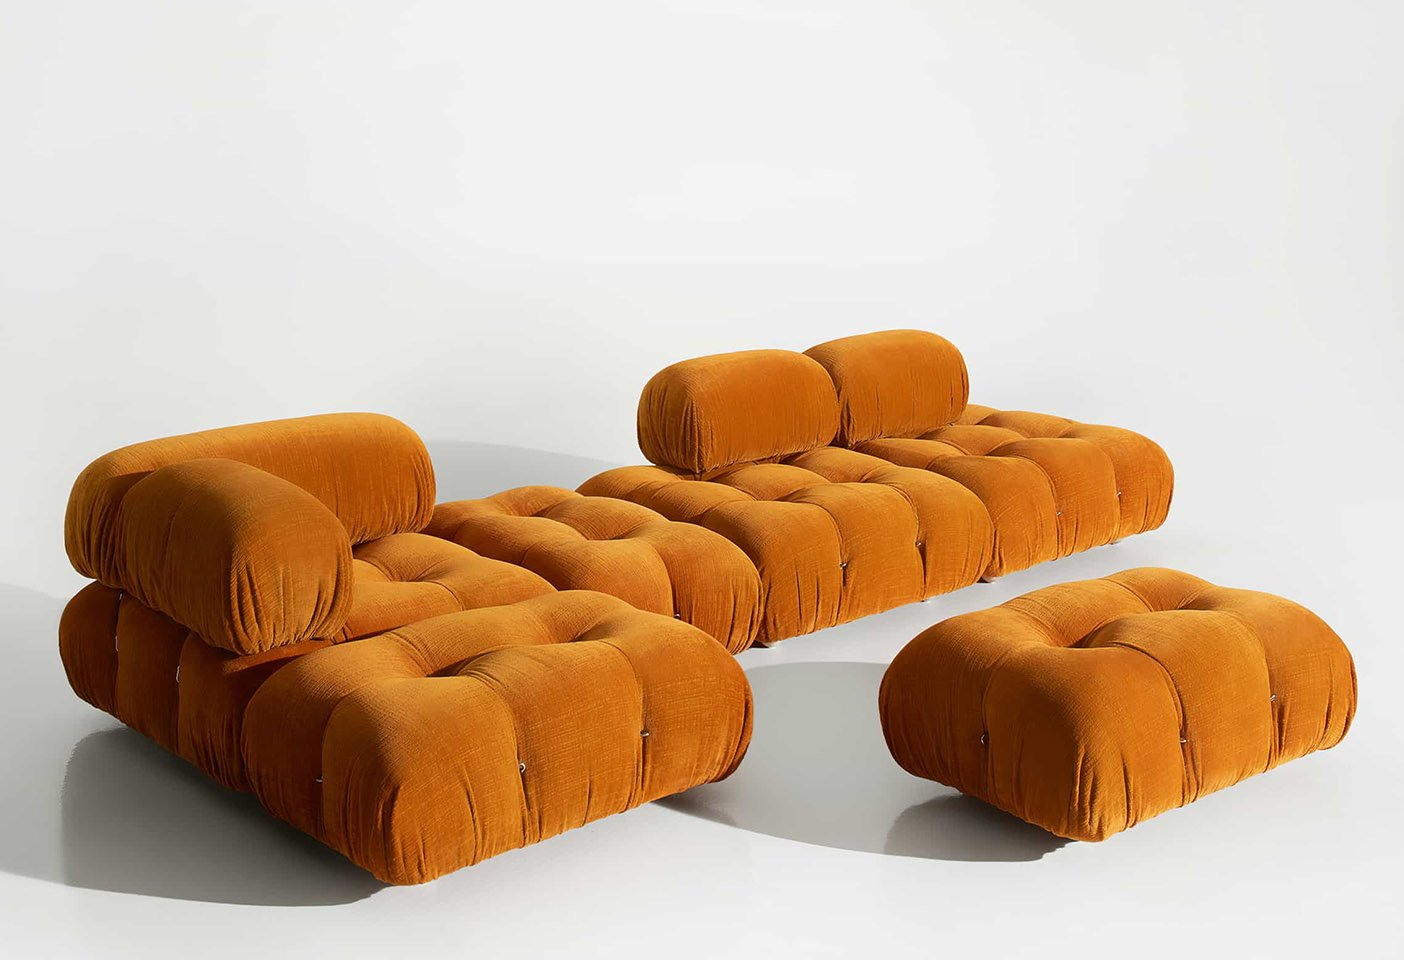 The Camaleonda sofa designed by Mario Bellini for B&B Italia in 1970 and relaunched in 2020 to allow the sofa to be dismantled, enabling all materials to have another life cycle, making the sofa's components an asset. Photo c/o B&B Italia 